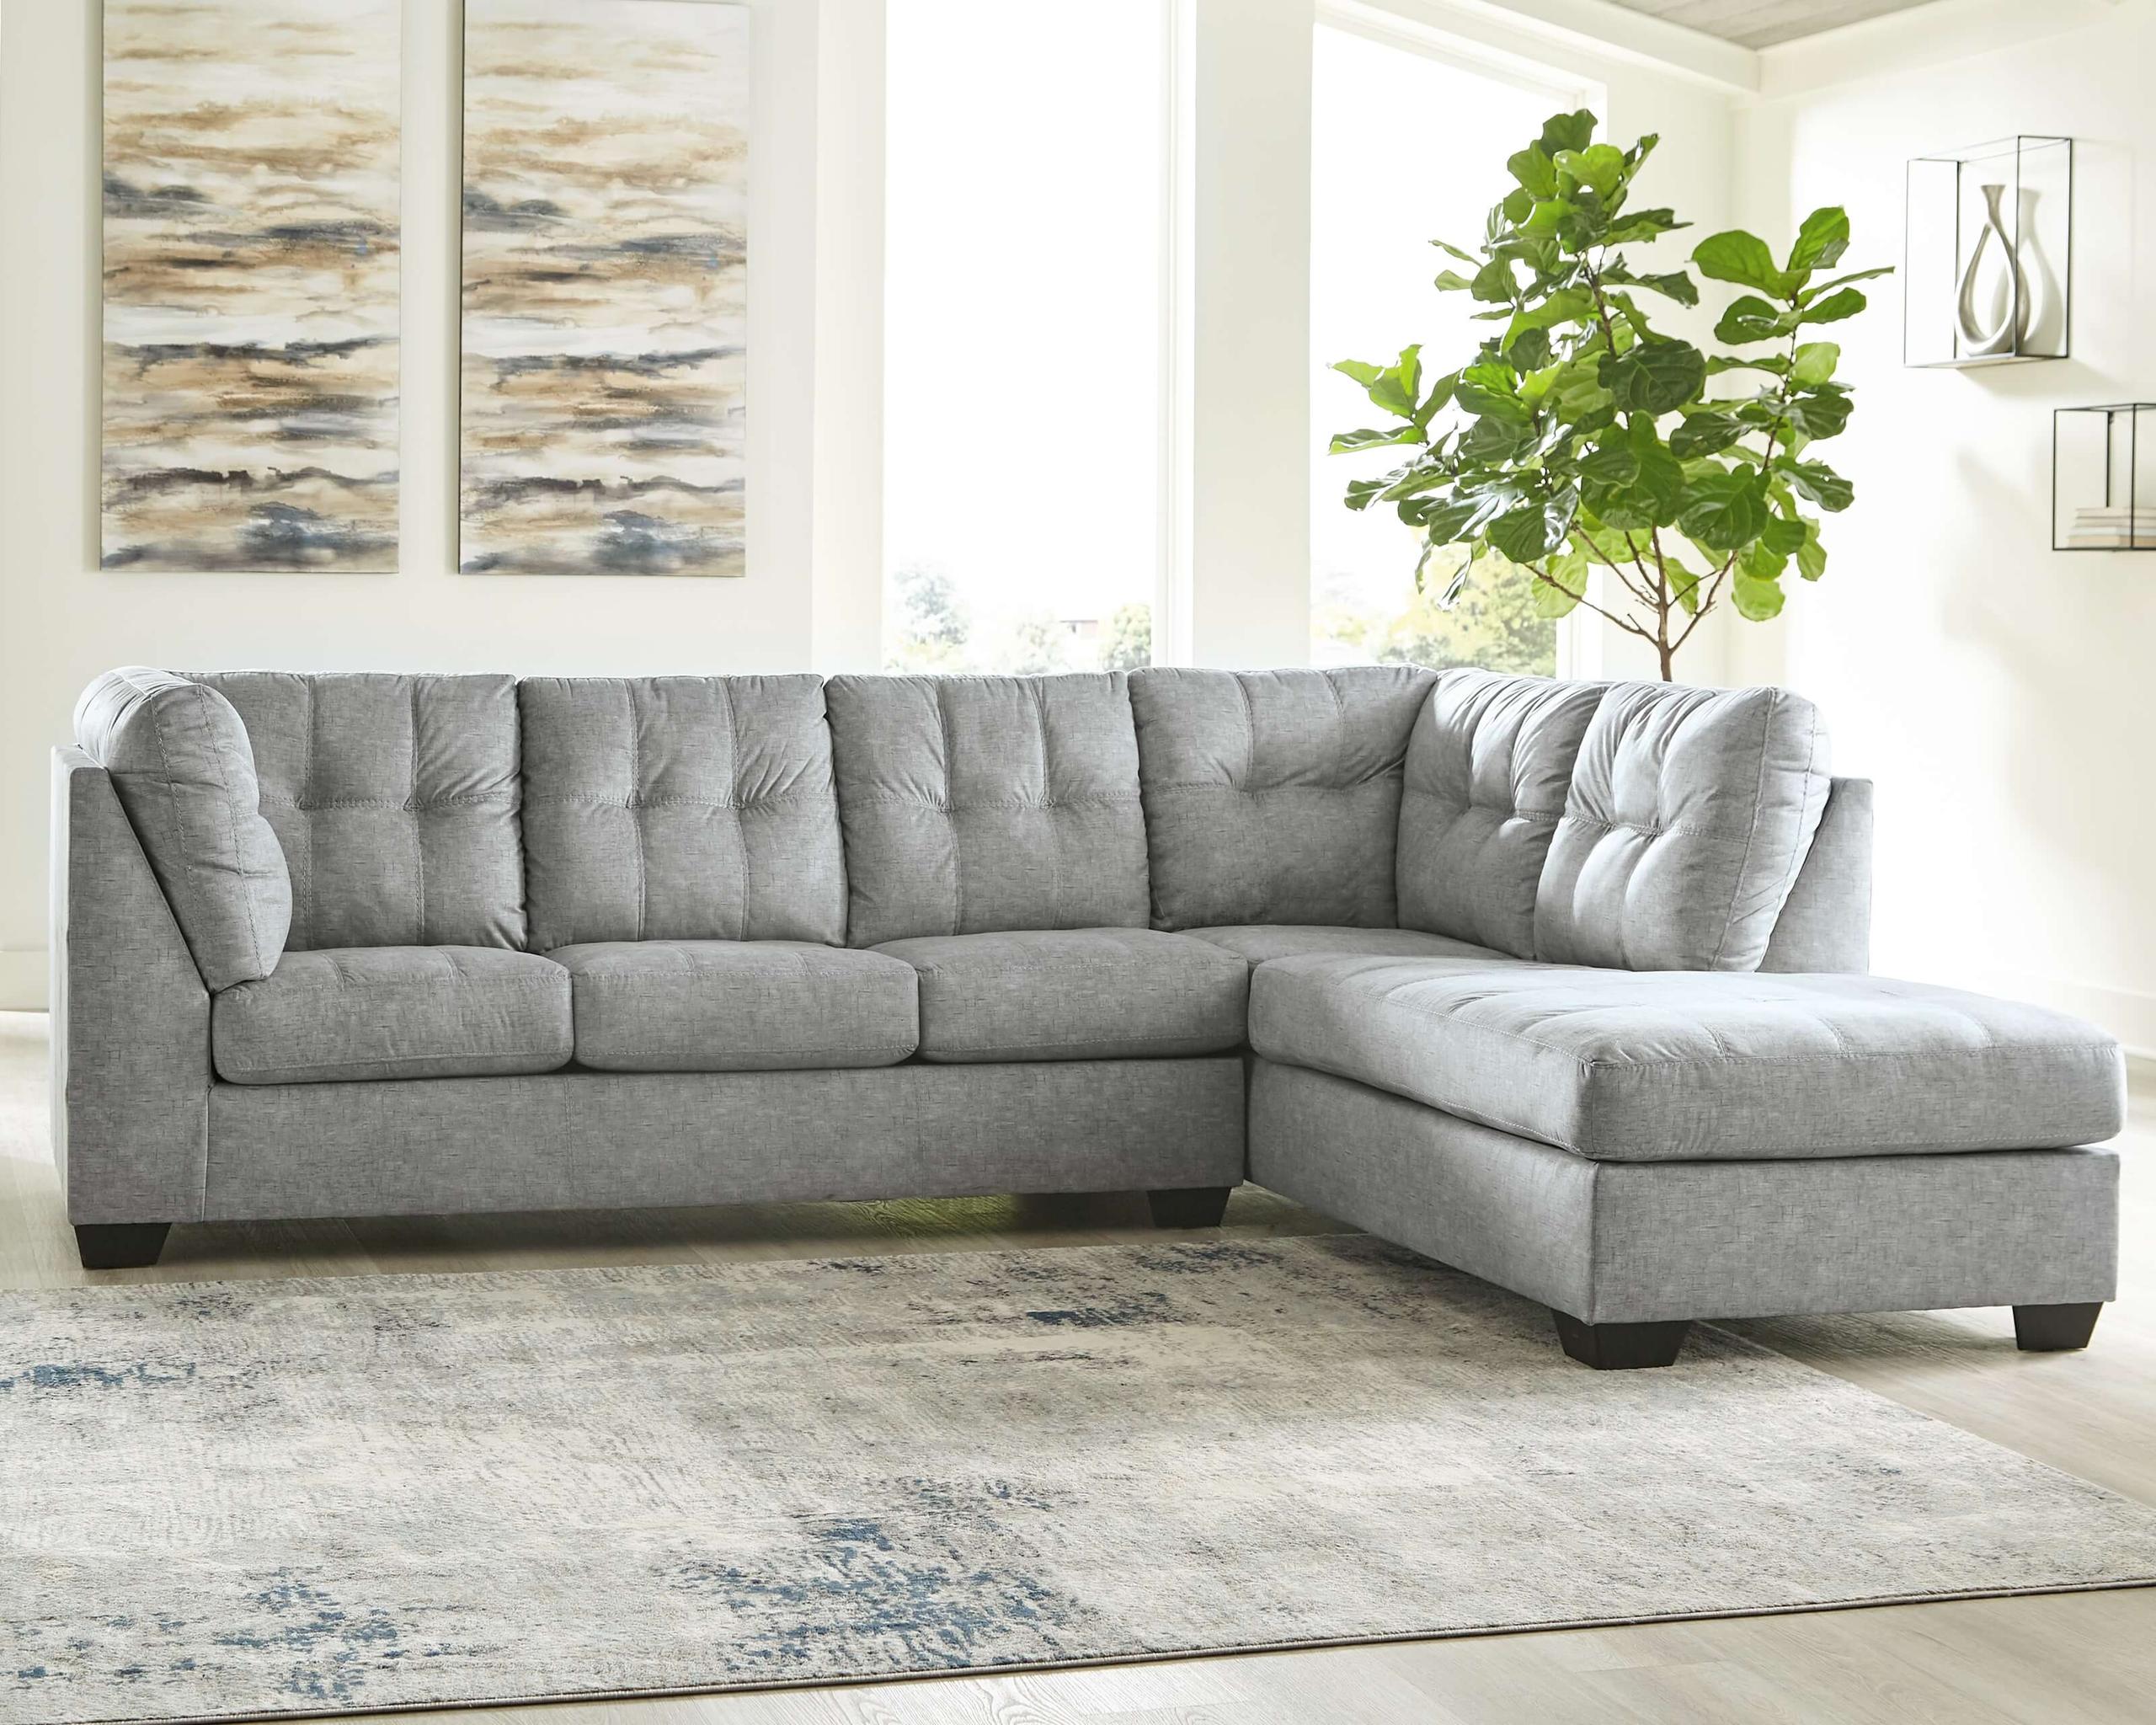 ASHLEY FURNITURE 80804S2 Falkirk 2-piece Sectional With Chaise